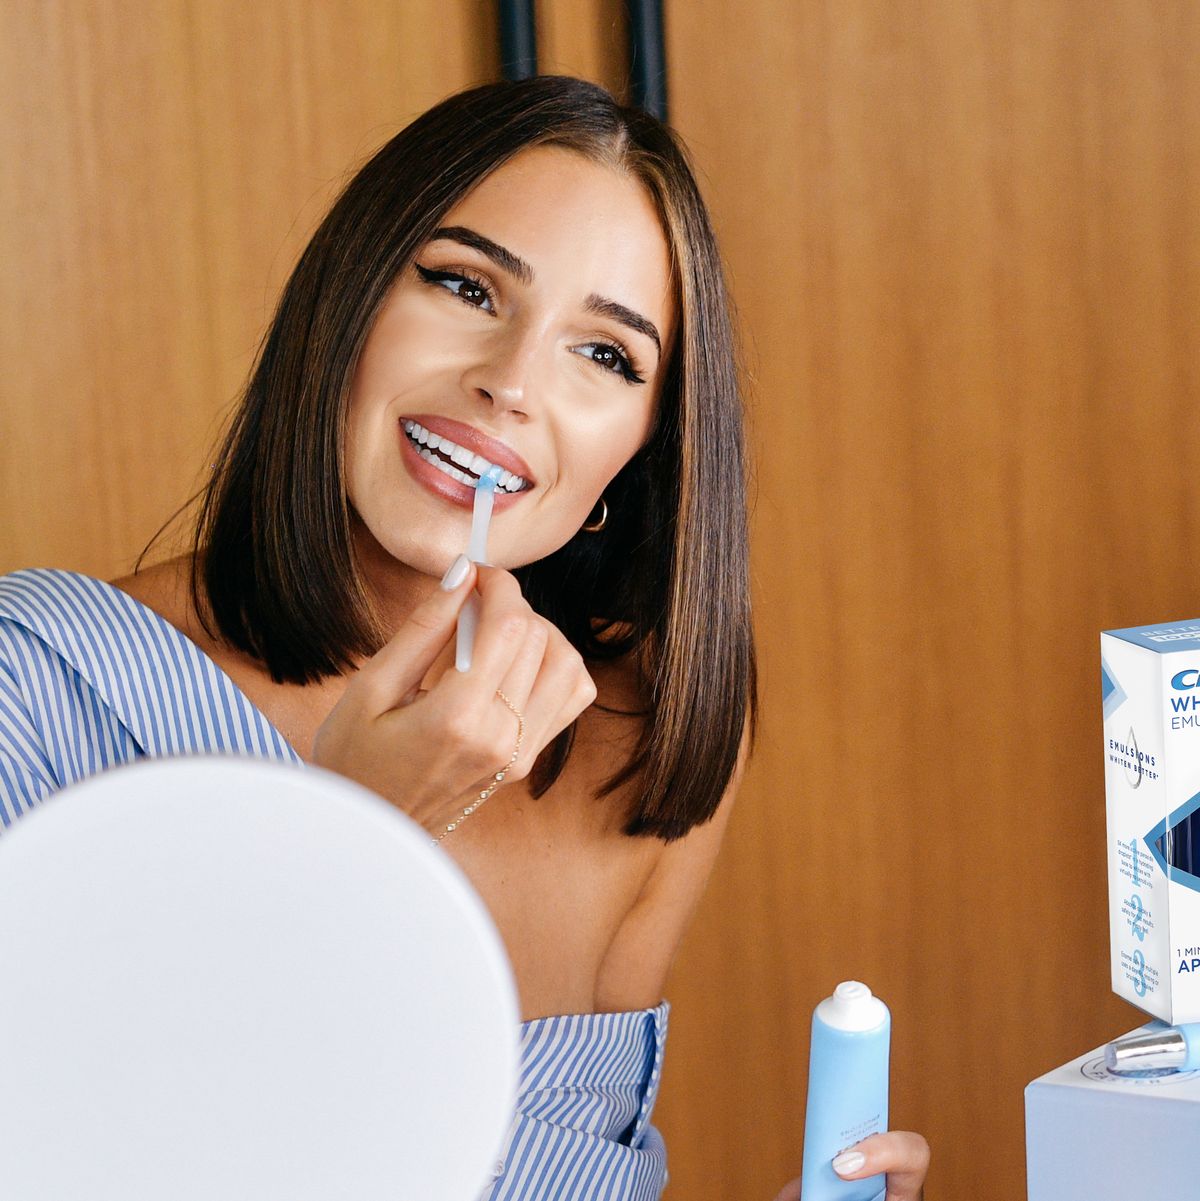 https://hips.hearstapps.com/hmg-prod/images/olivia-culpo-applies-new-crest-whitening-emulsions-leave-on-news-photo-1682710920.jpg?crop=0.748xw:0.907xh;0.00801xw,0.0932xh&resize=1200:*